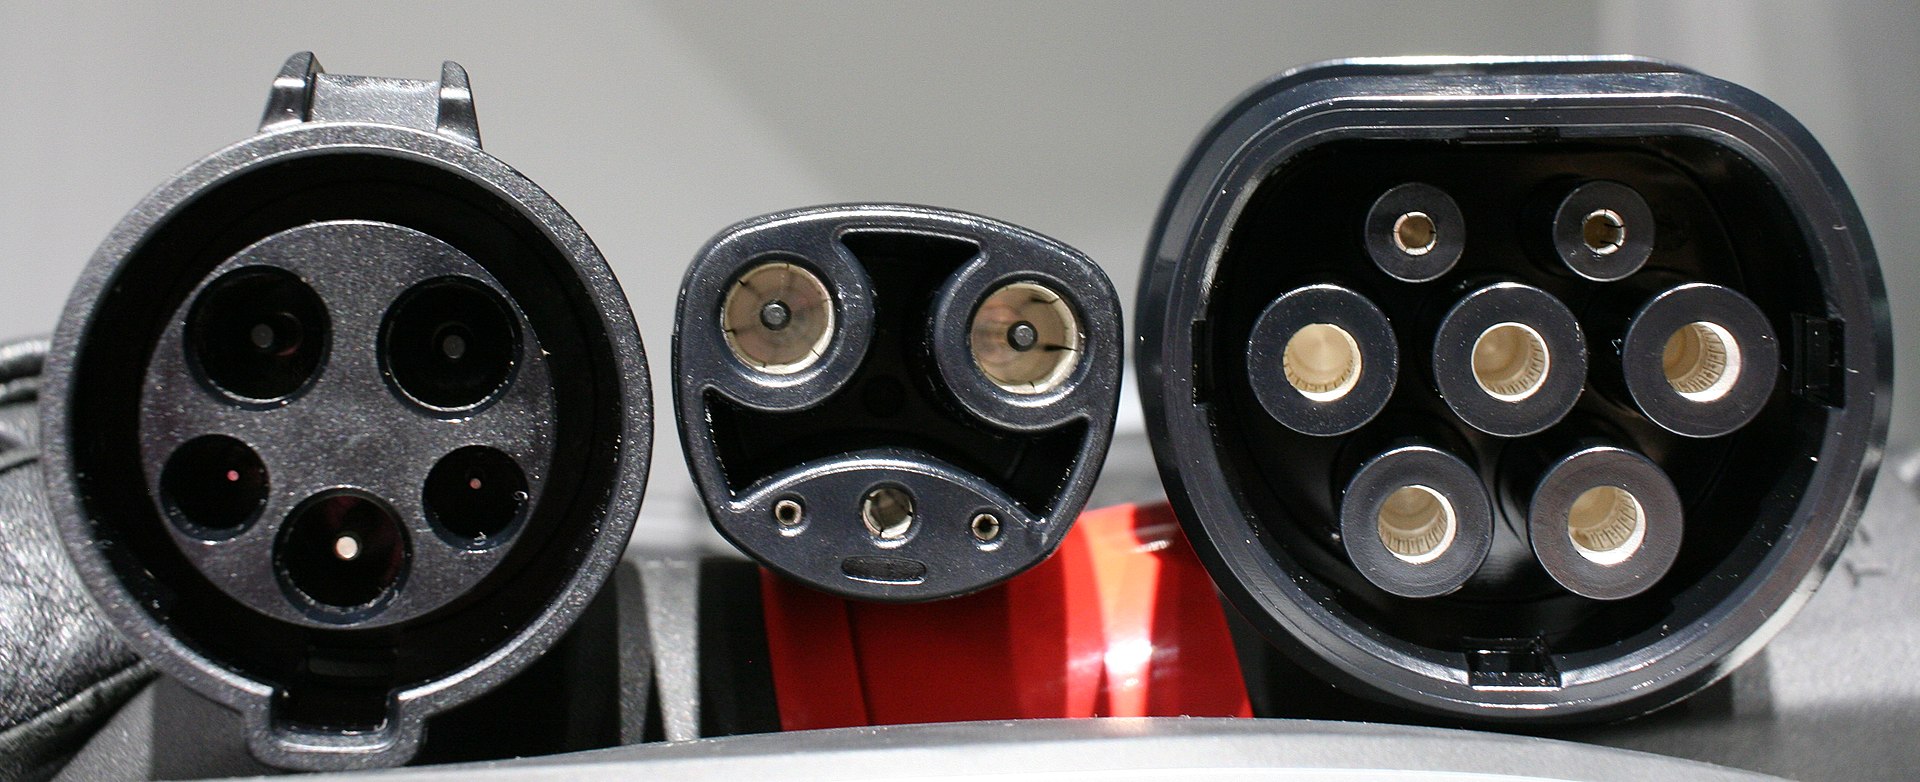 1920px-Tesla-type-1-inlet-tesla02-outlet-iec-type-2-outlet-cropped.jpg